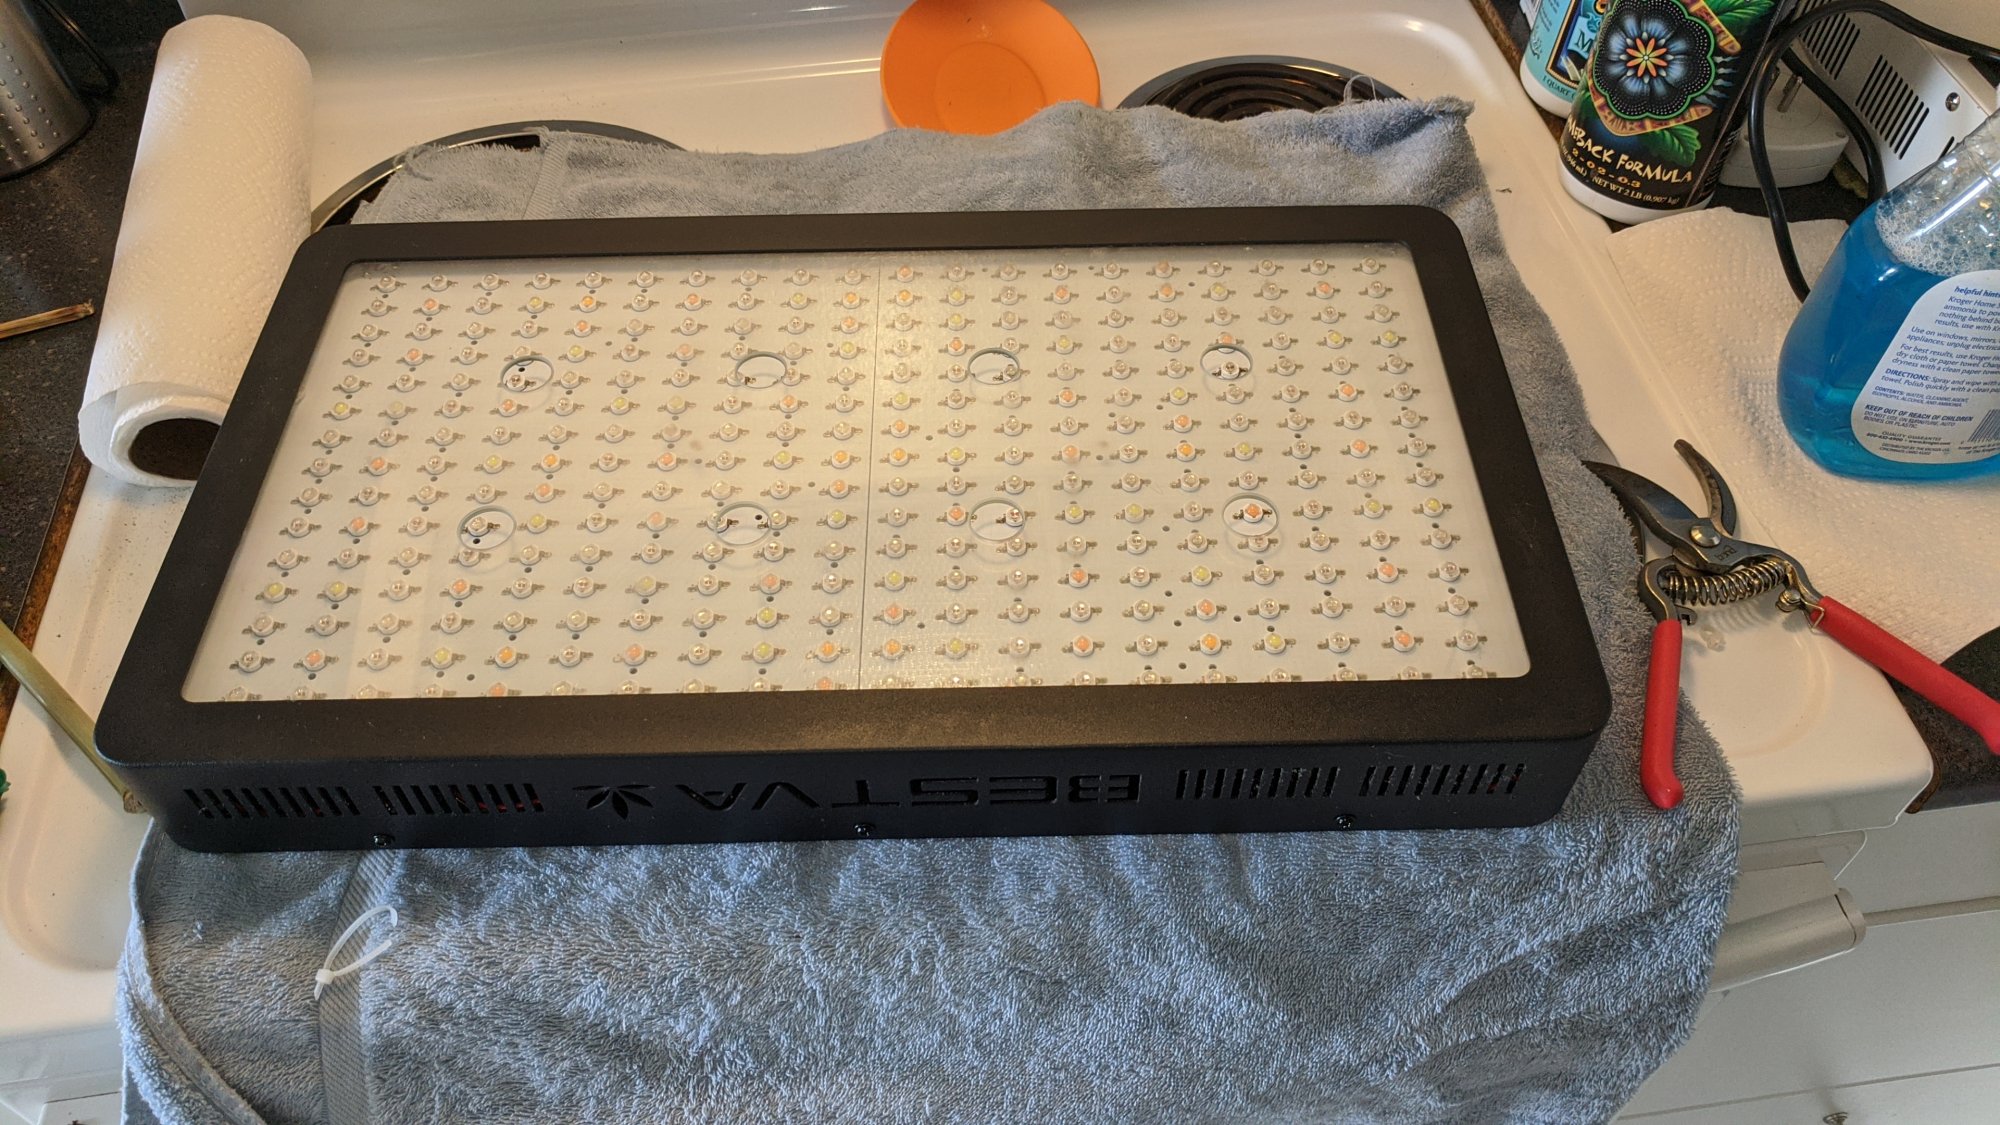 Led grow light maintenance keeping it running cool disassembly photos 7